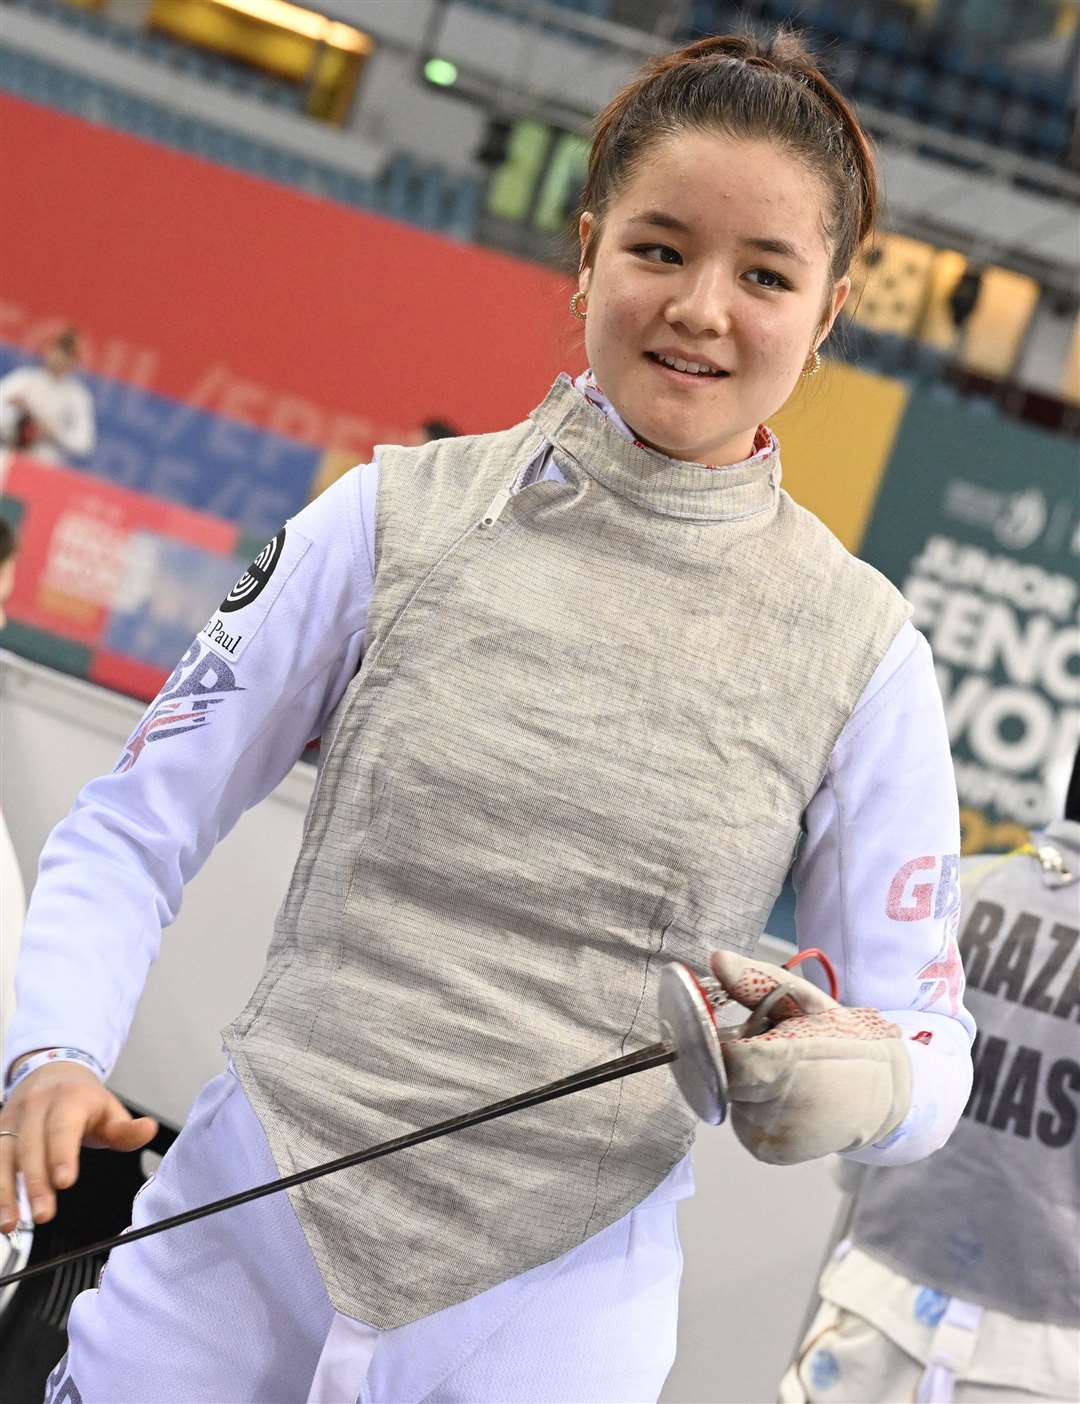 .Bromley's Amelie Tsang is being supported by British Fencing - and has already made impressive progress at the World Cadet Championships in Dubai